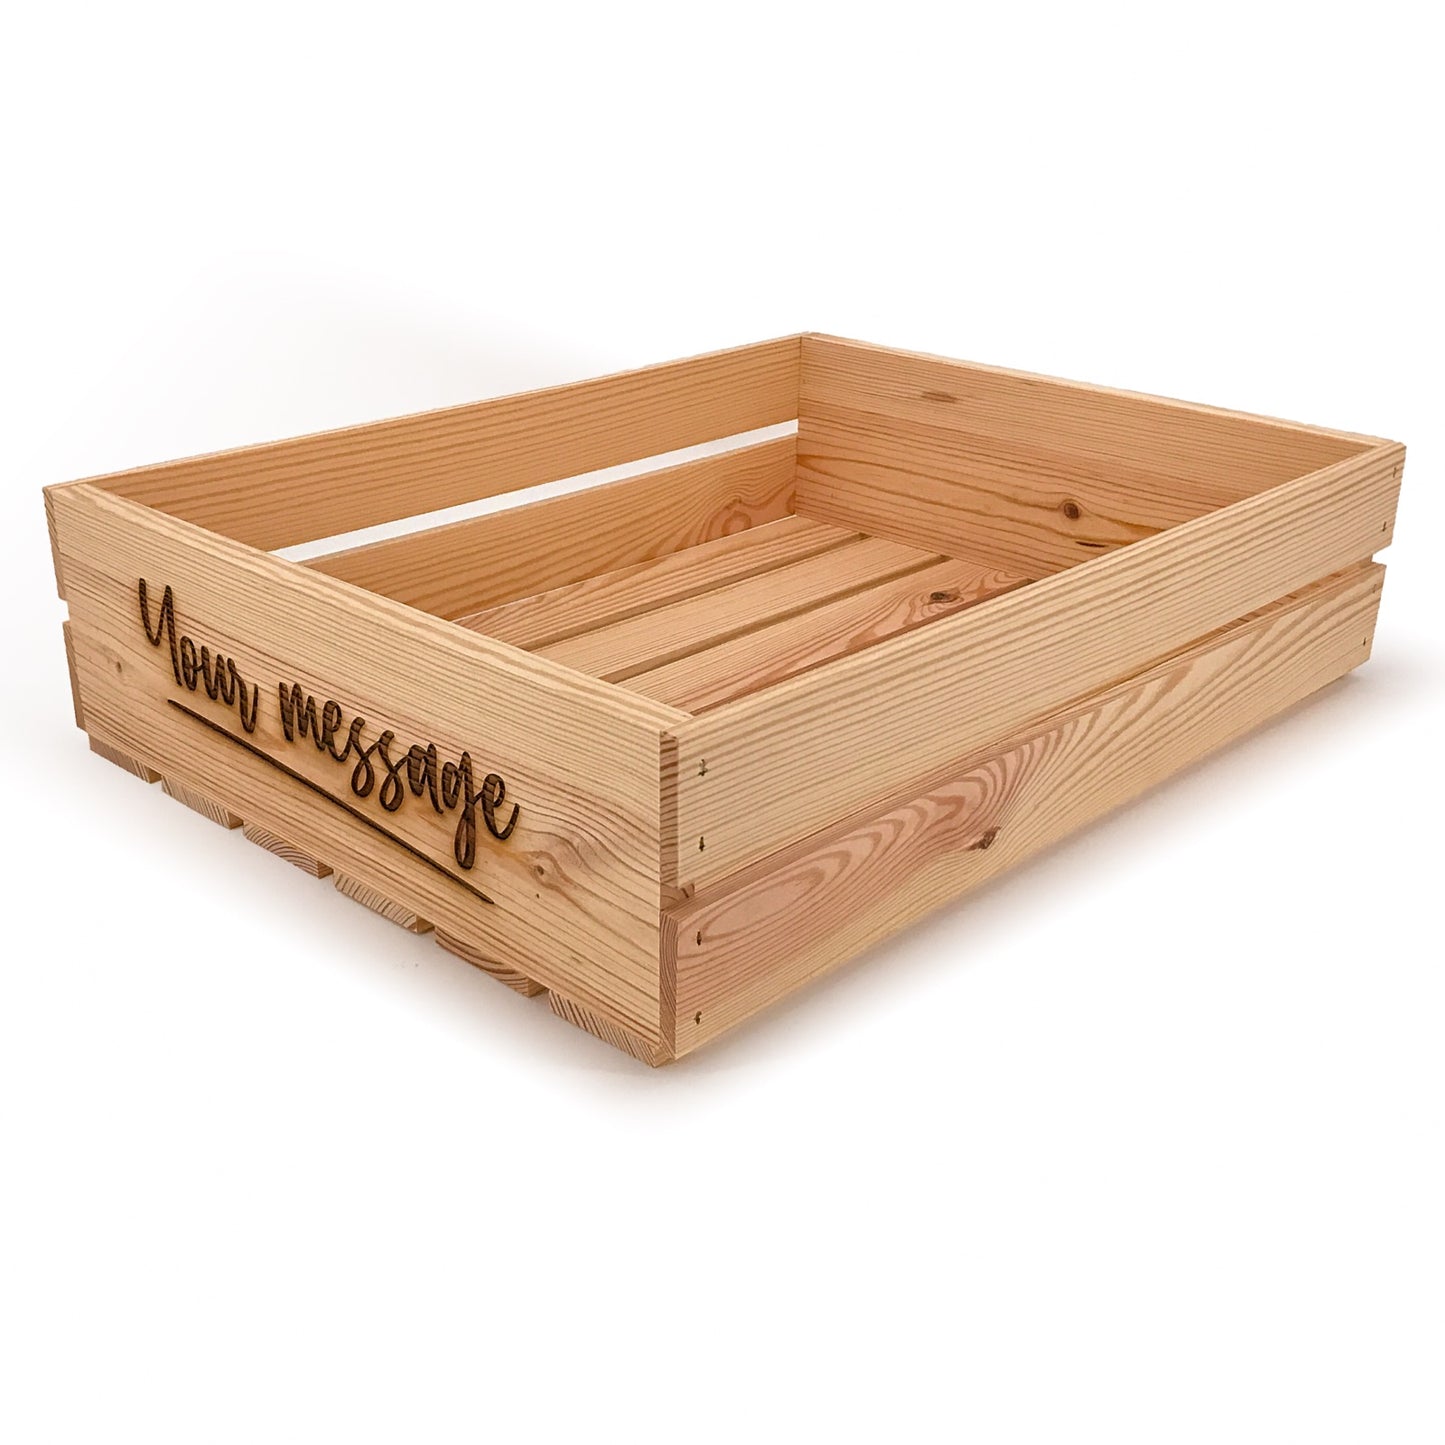 Small wooden crate with custom message 22x17x5.25